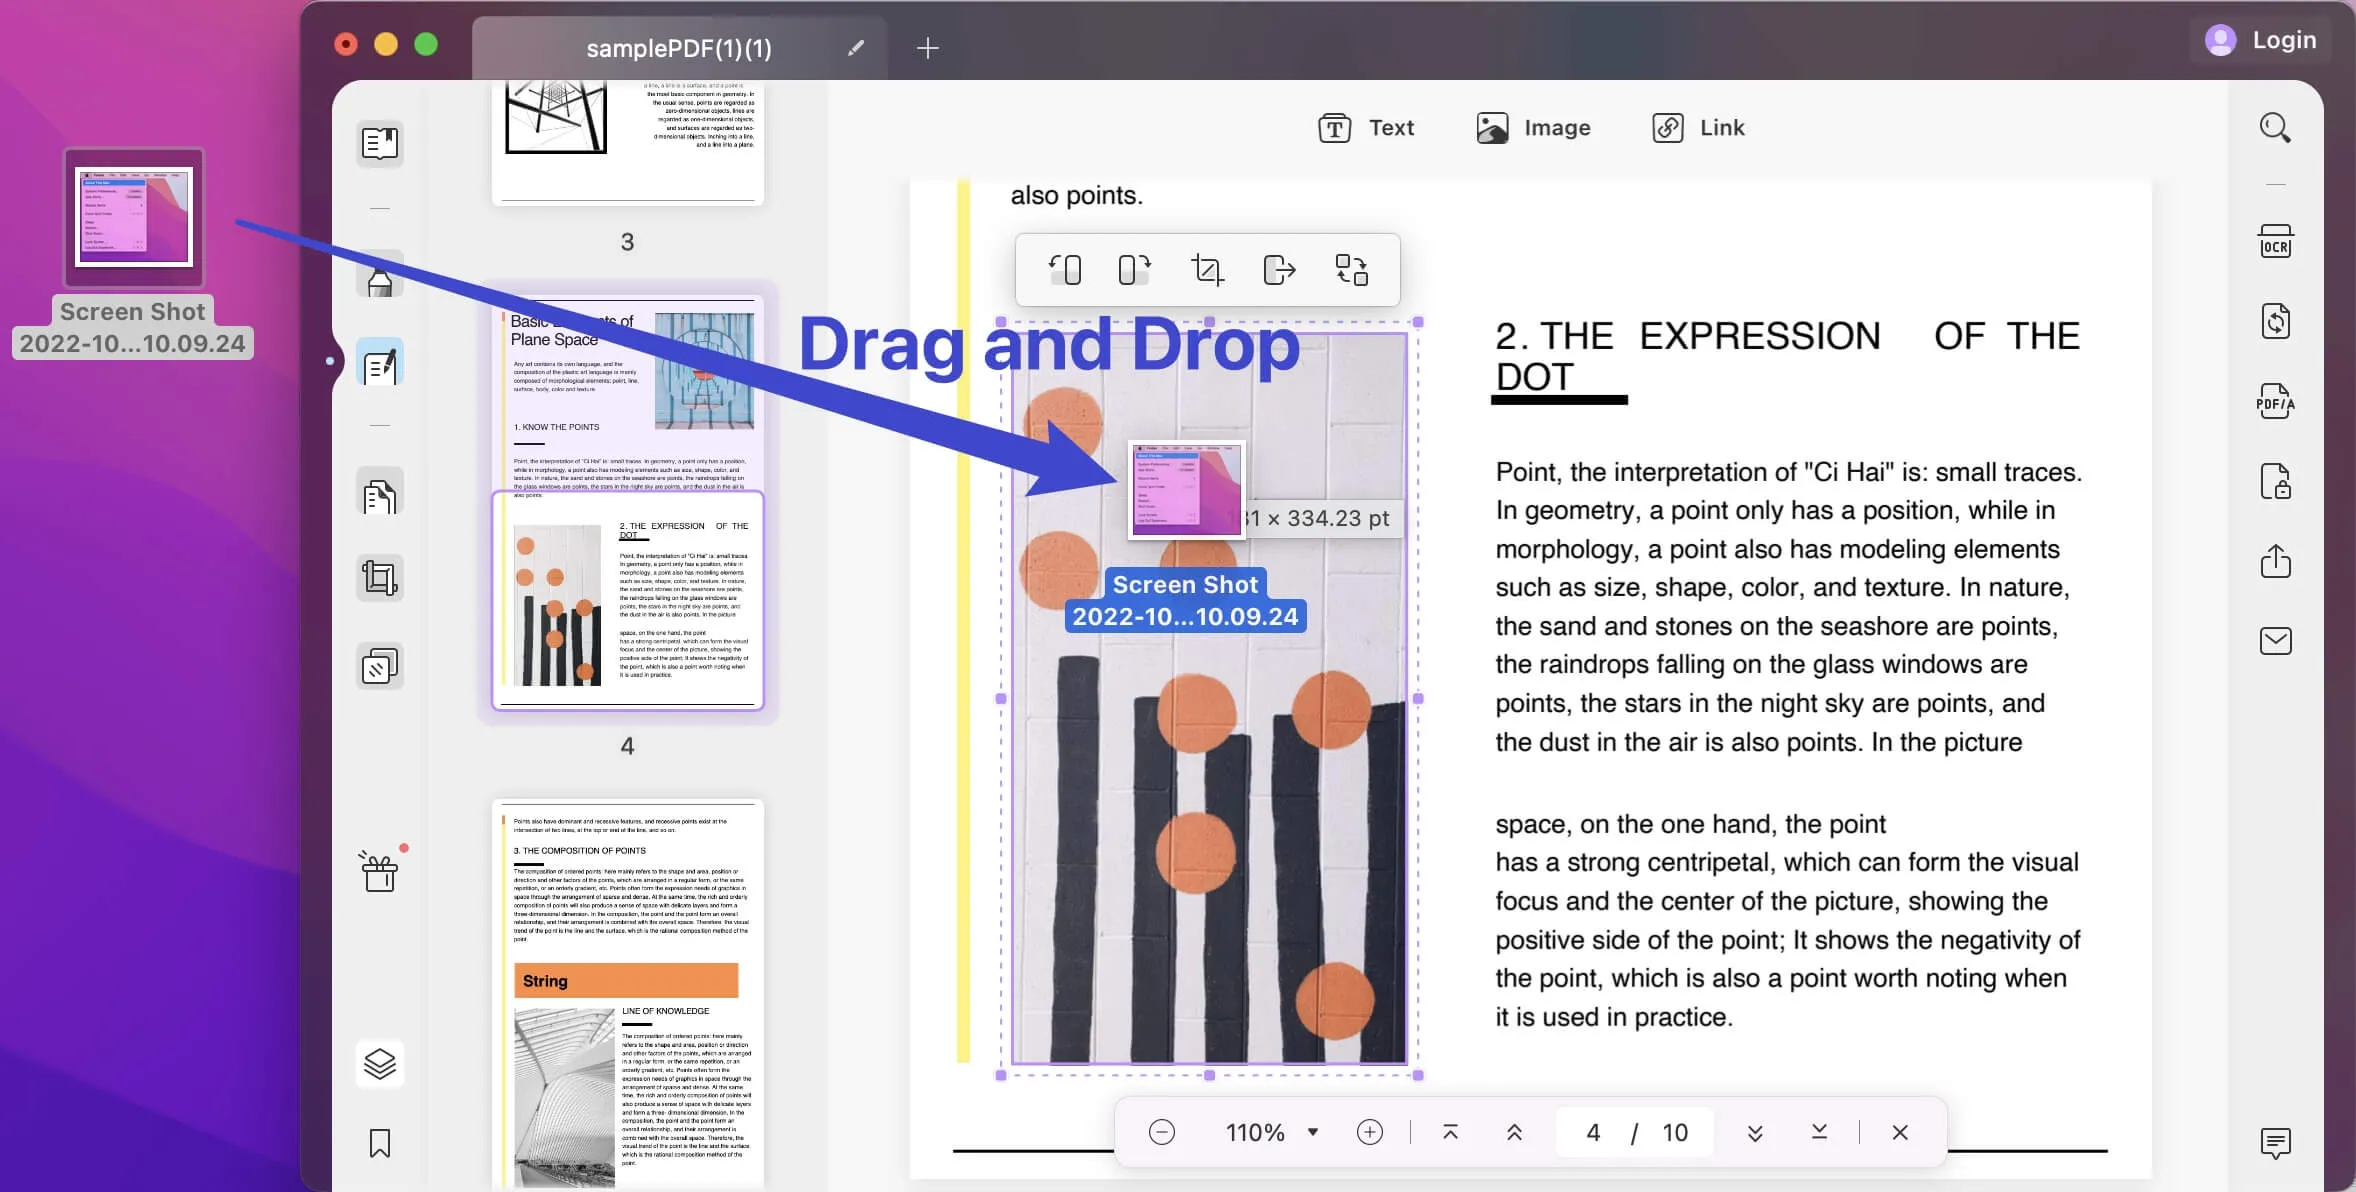 drag and drop image to replace image in pdf